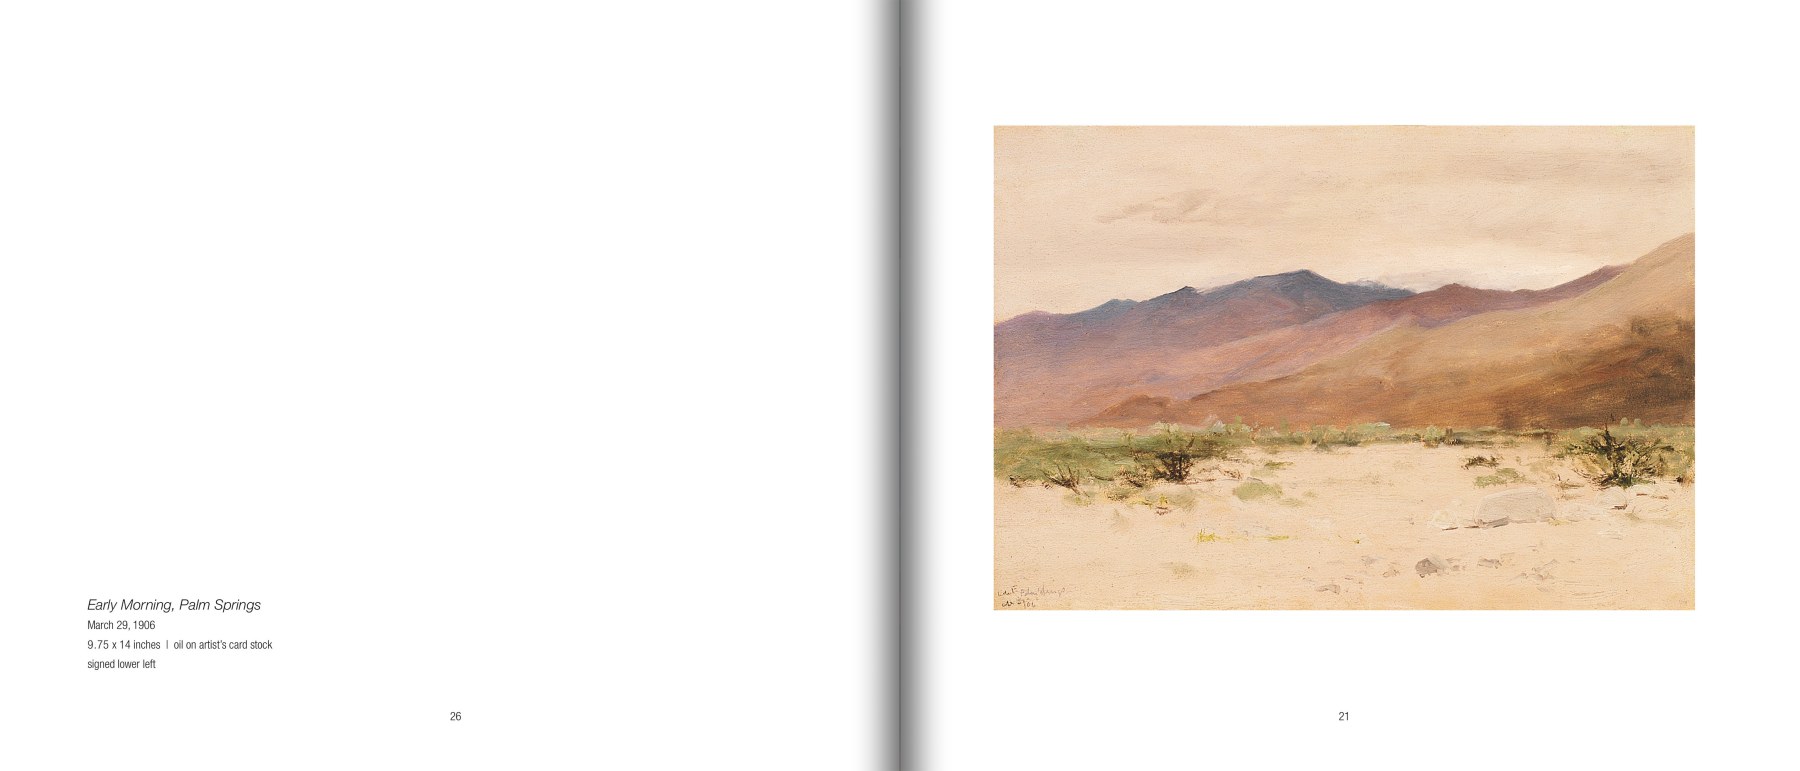 Pages 20 and 21 of De Forest's PALM SPRINGS, featuring &quot;Early Morning, Palm Springs&quot;, Mar. 29, 1906 by Lockwood de Forest (1850-1932)